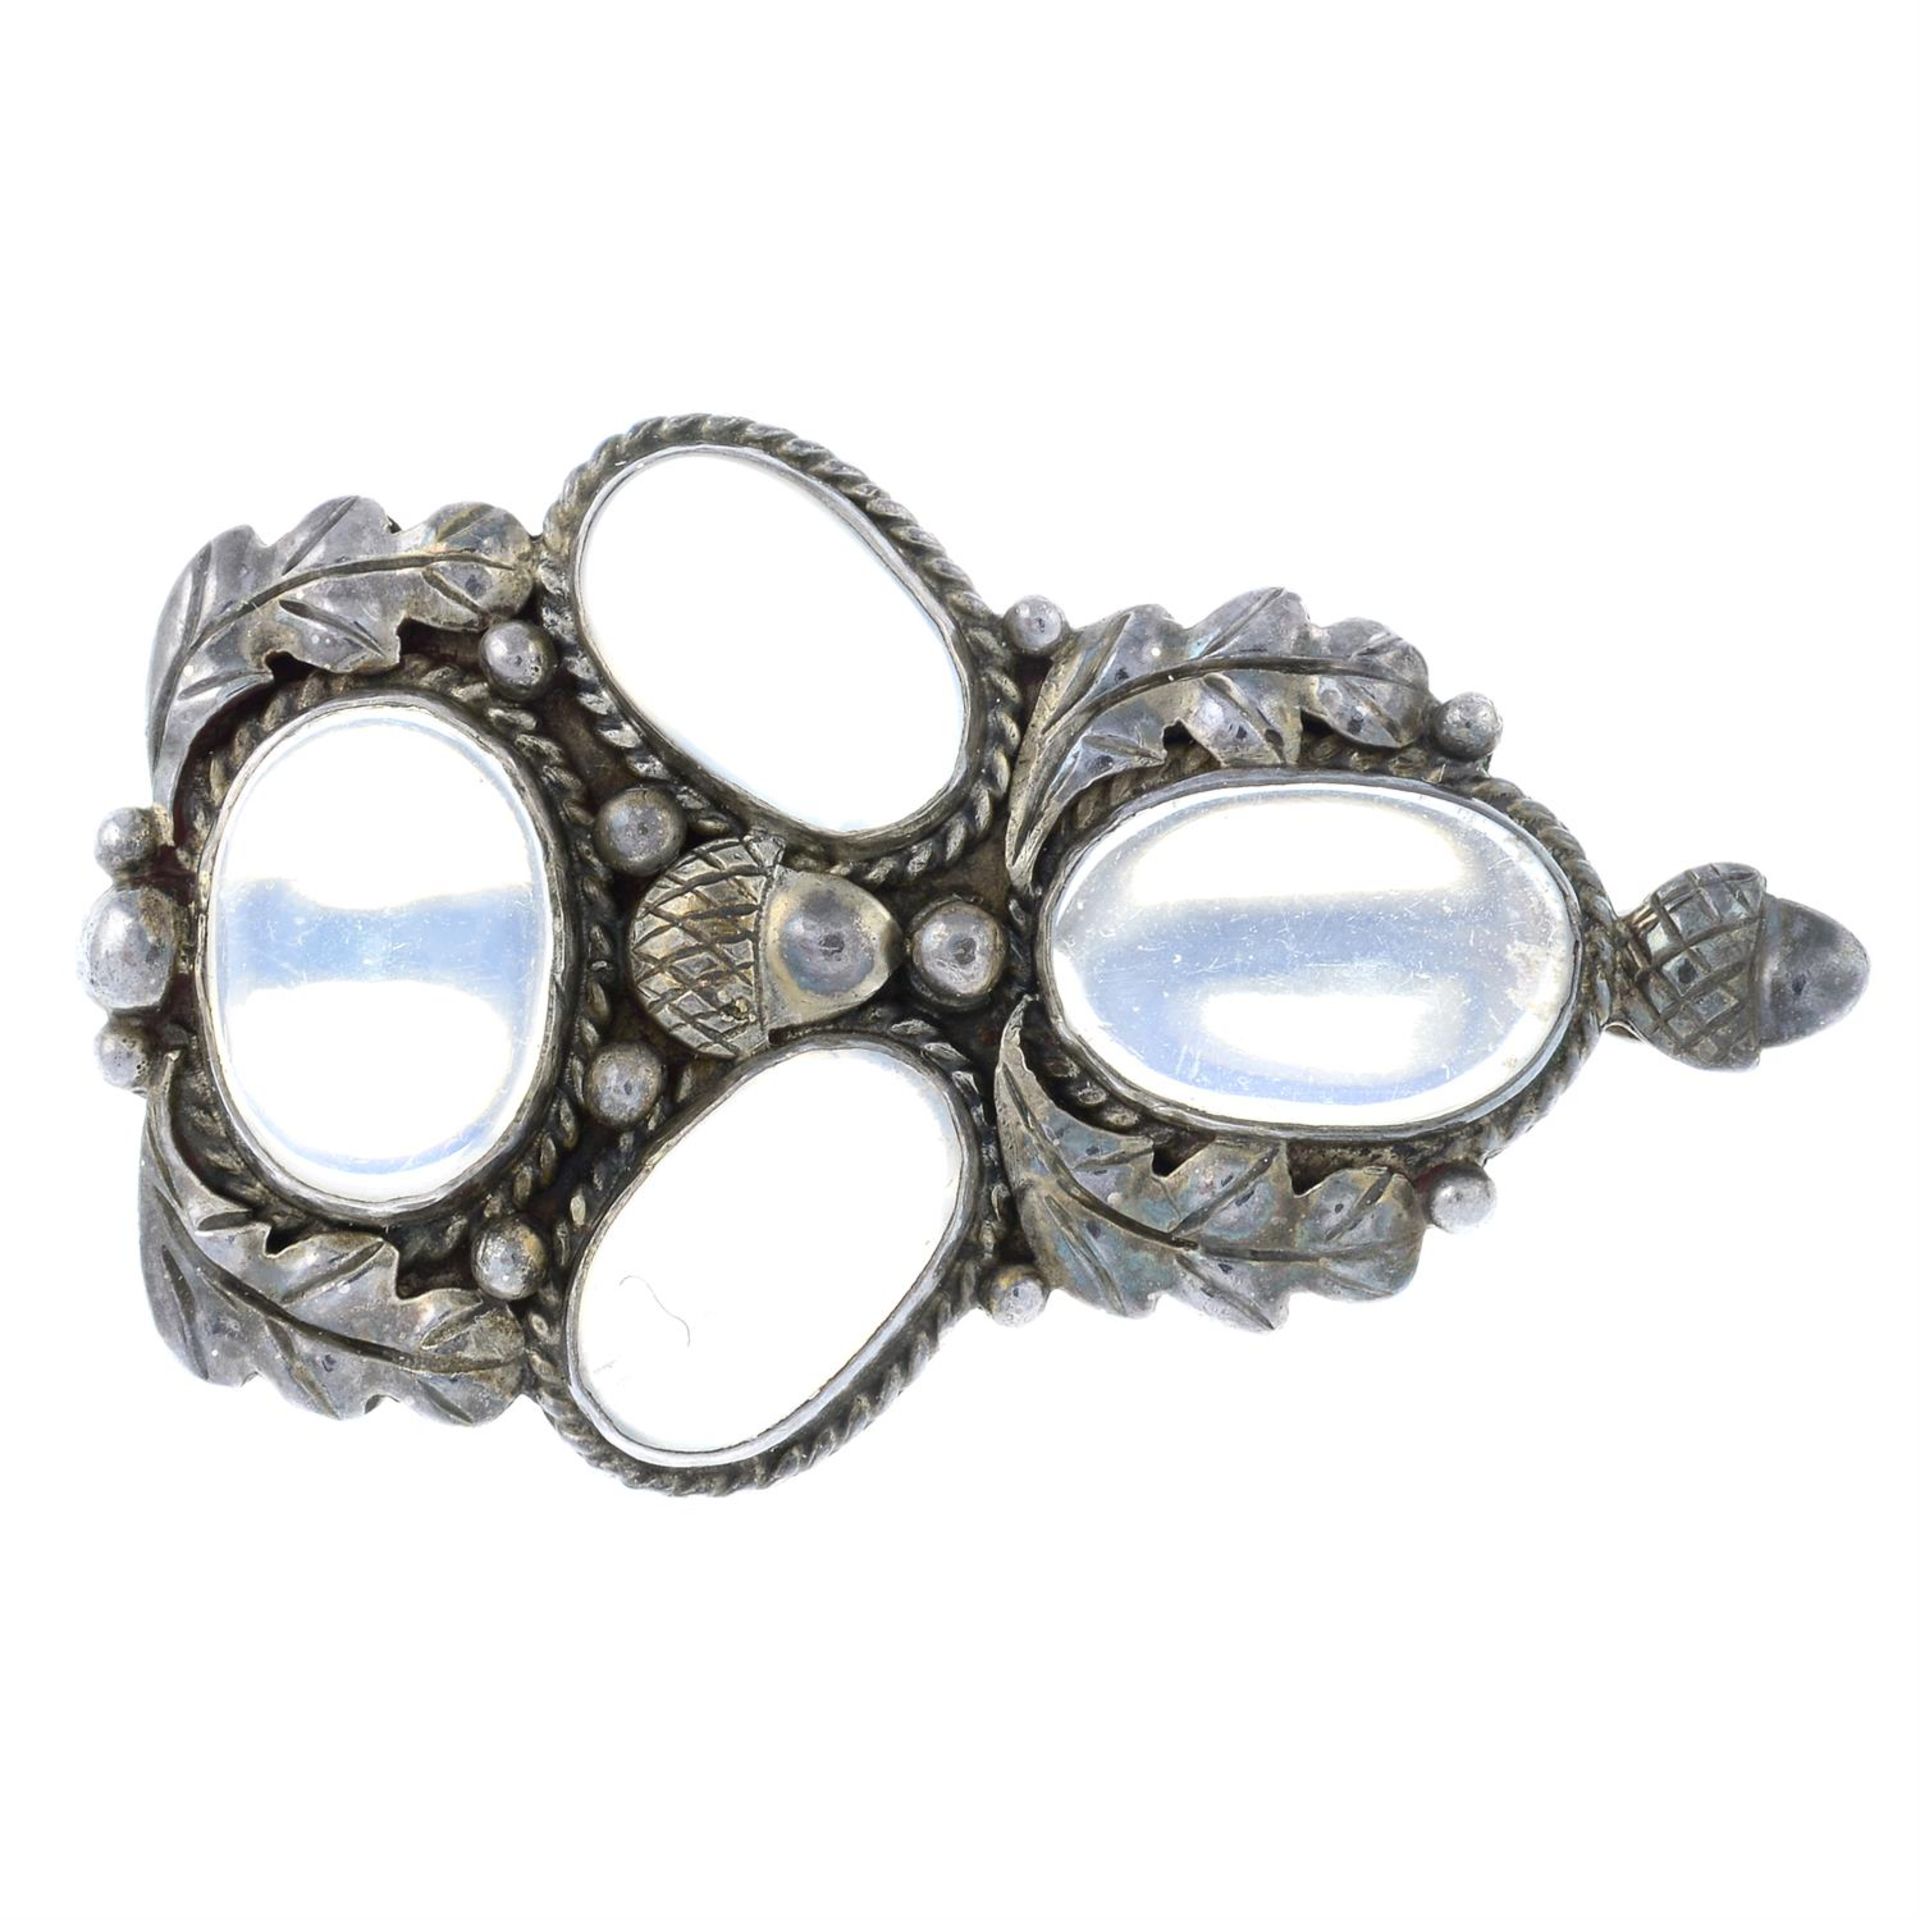 An Arts and Crafts silver moonstone brooch, with acorn and oak leaf motif, attributed to Bernard